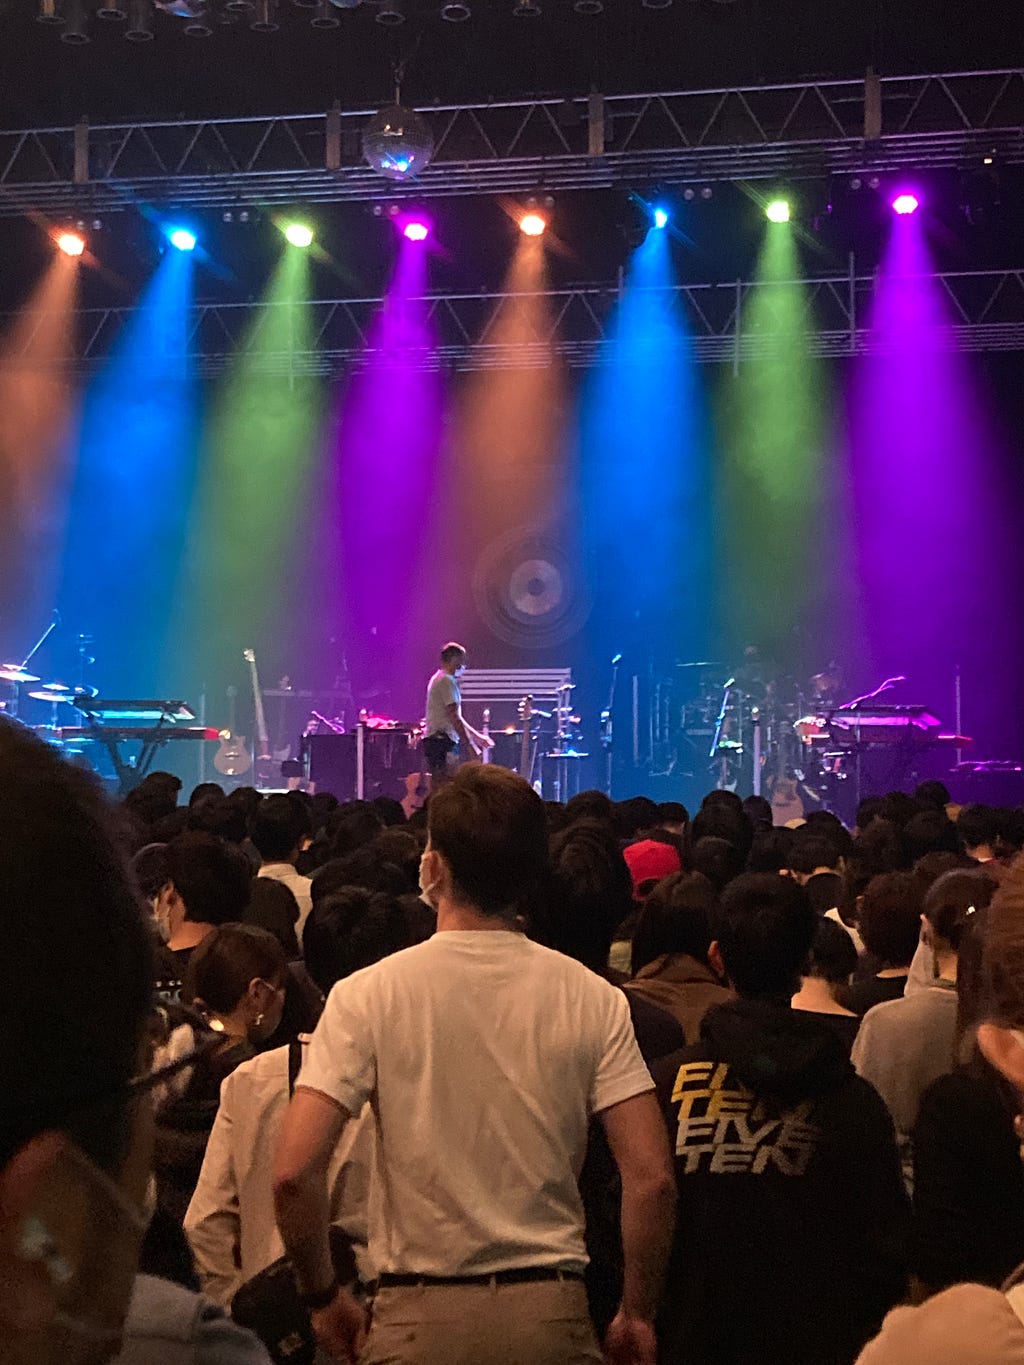 The stage before Jacob Collier’s performance begins.